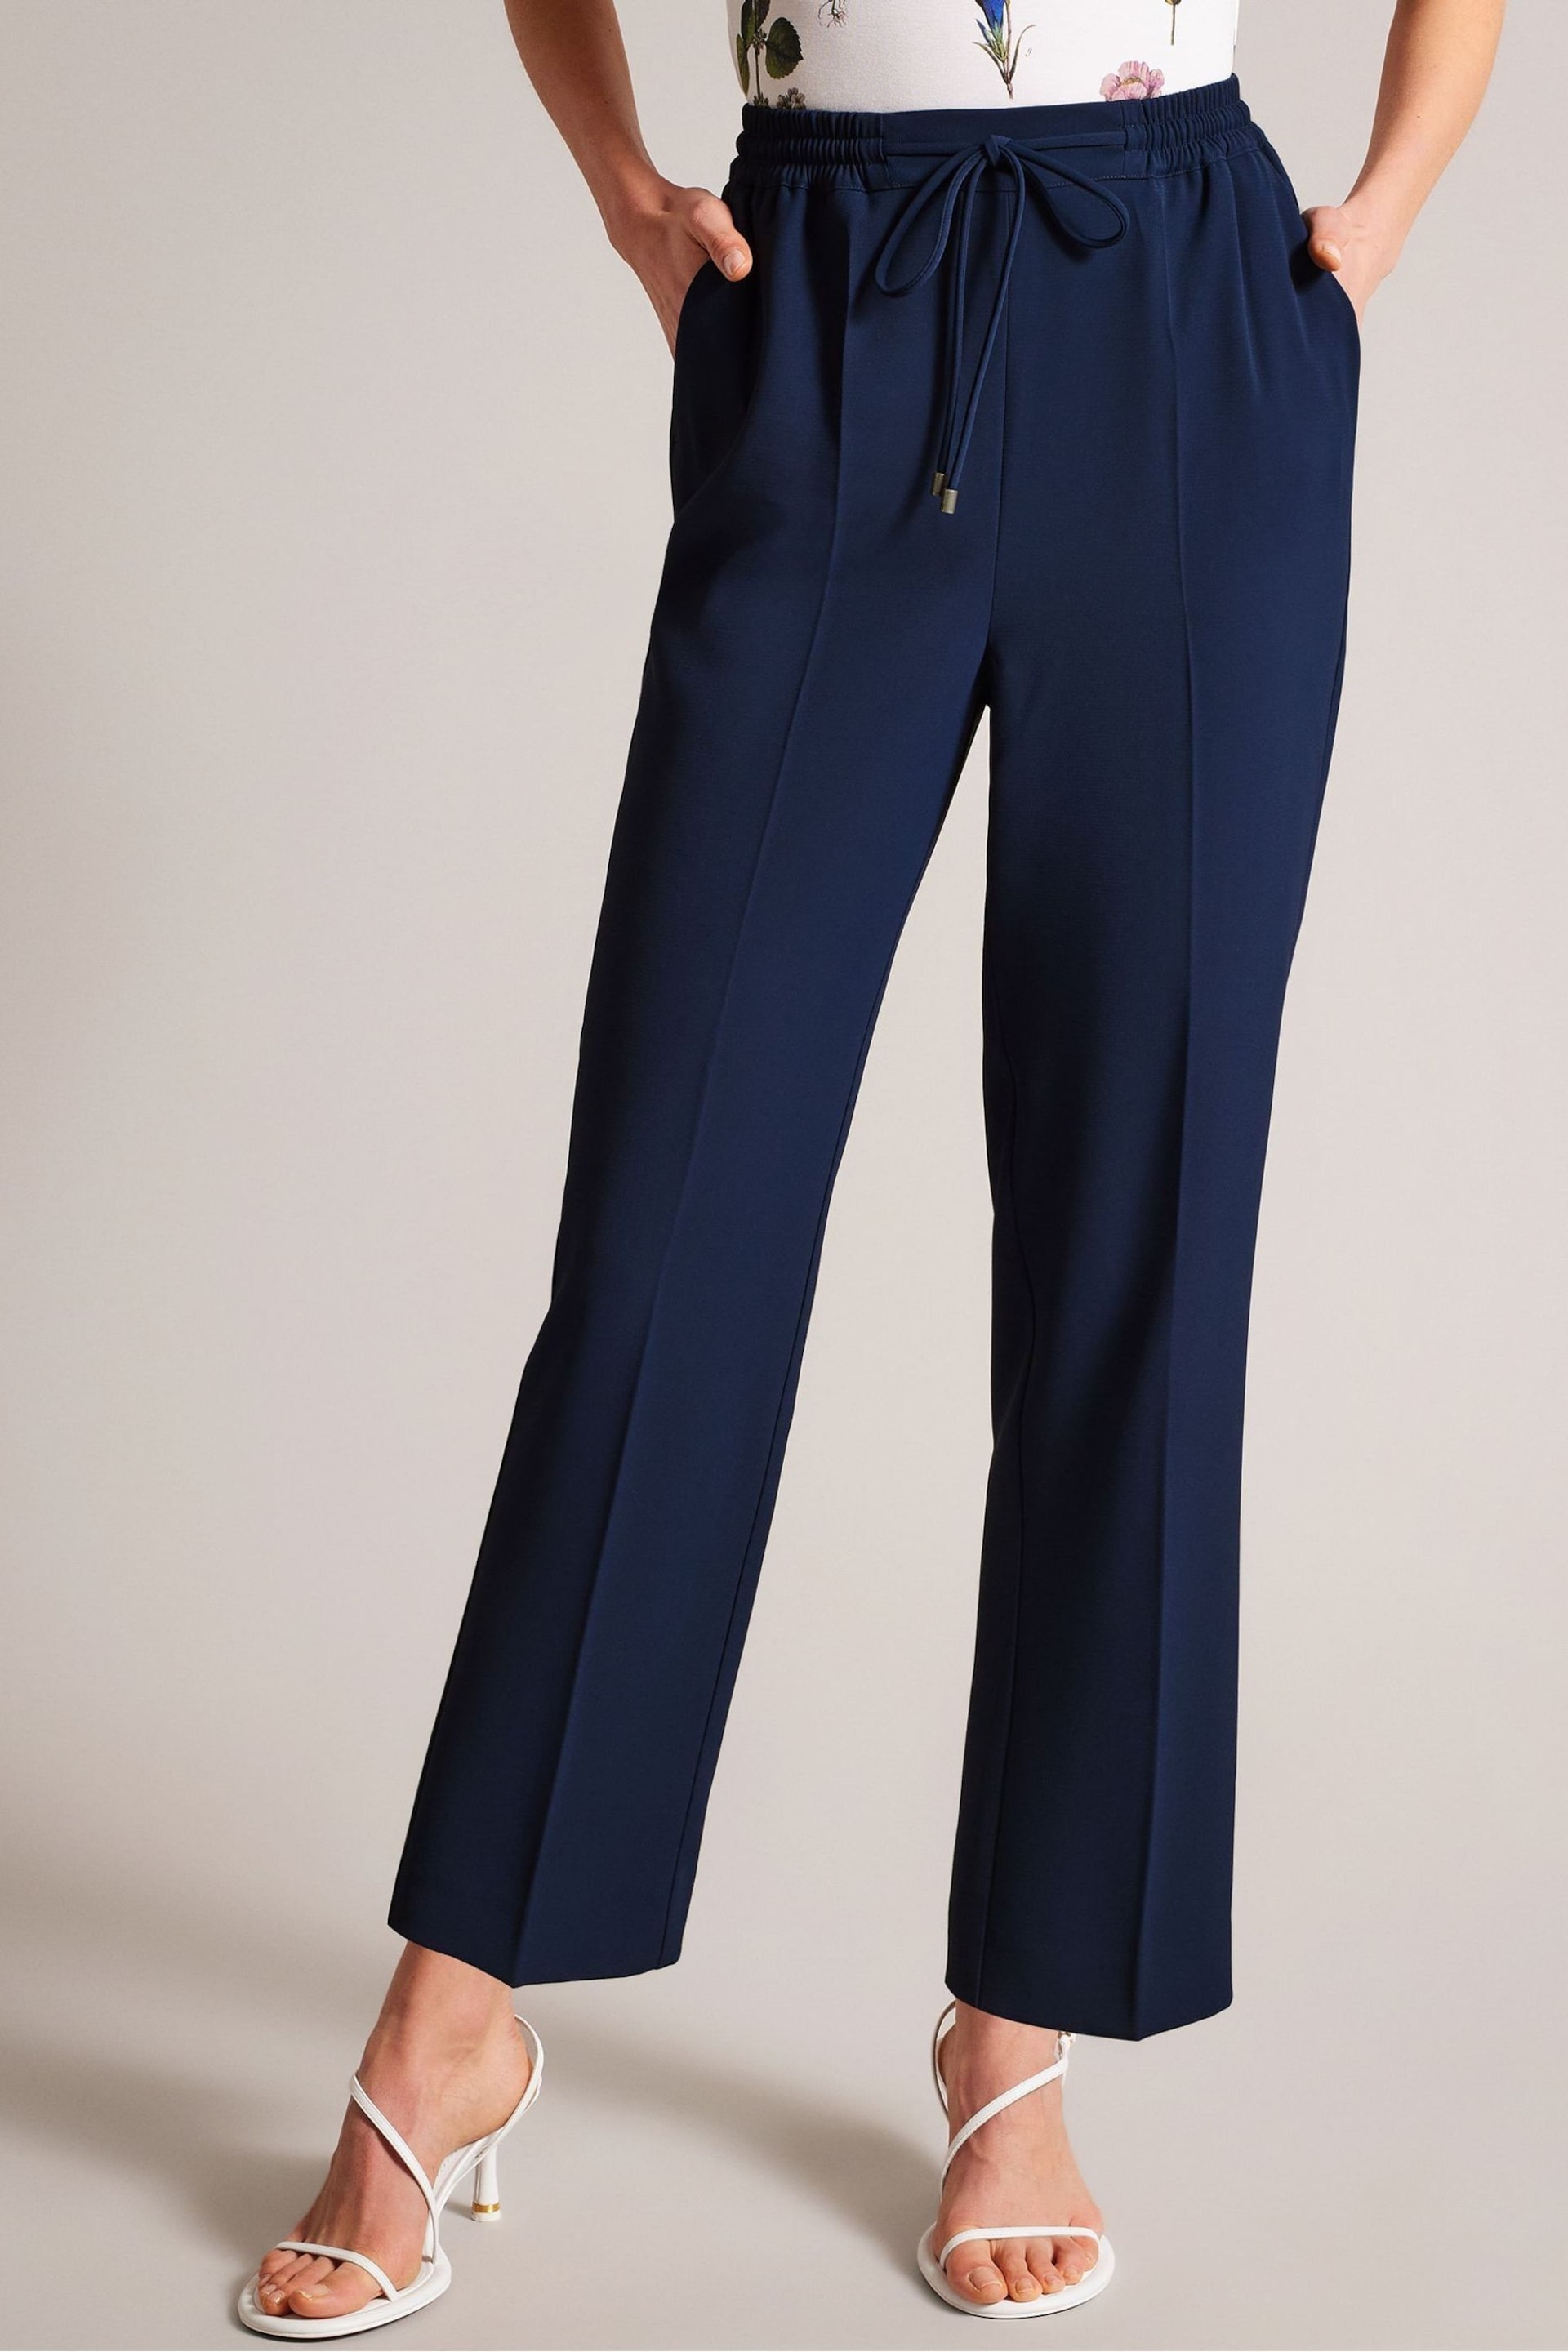 Ted Baker Blue Laurai Slim Cut Ankle Length Trousers - Image 1 of 5